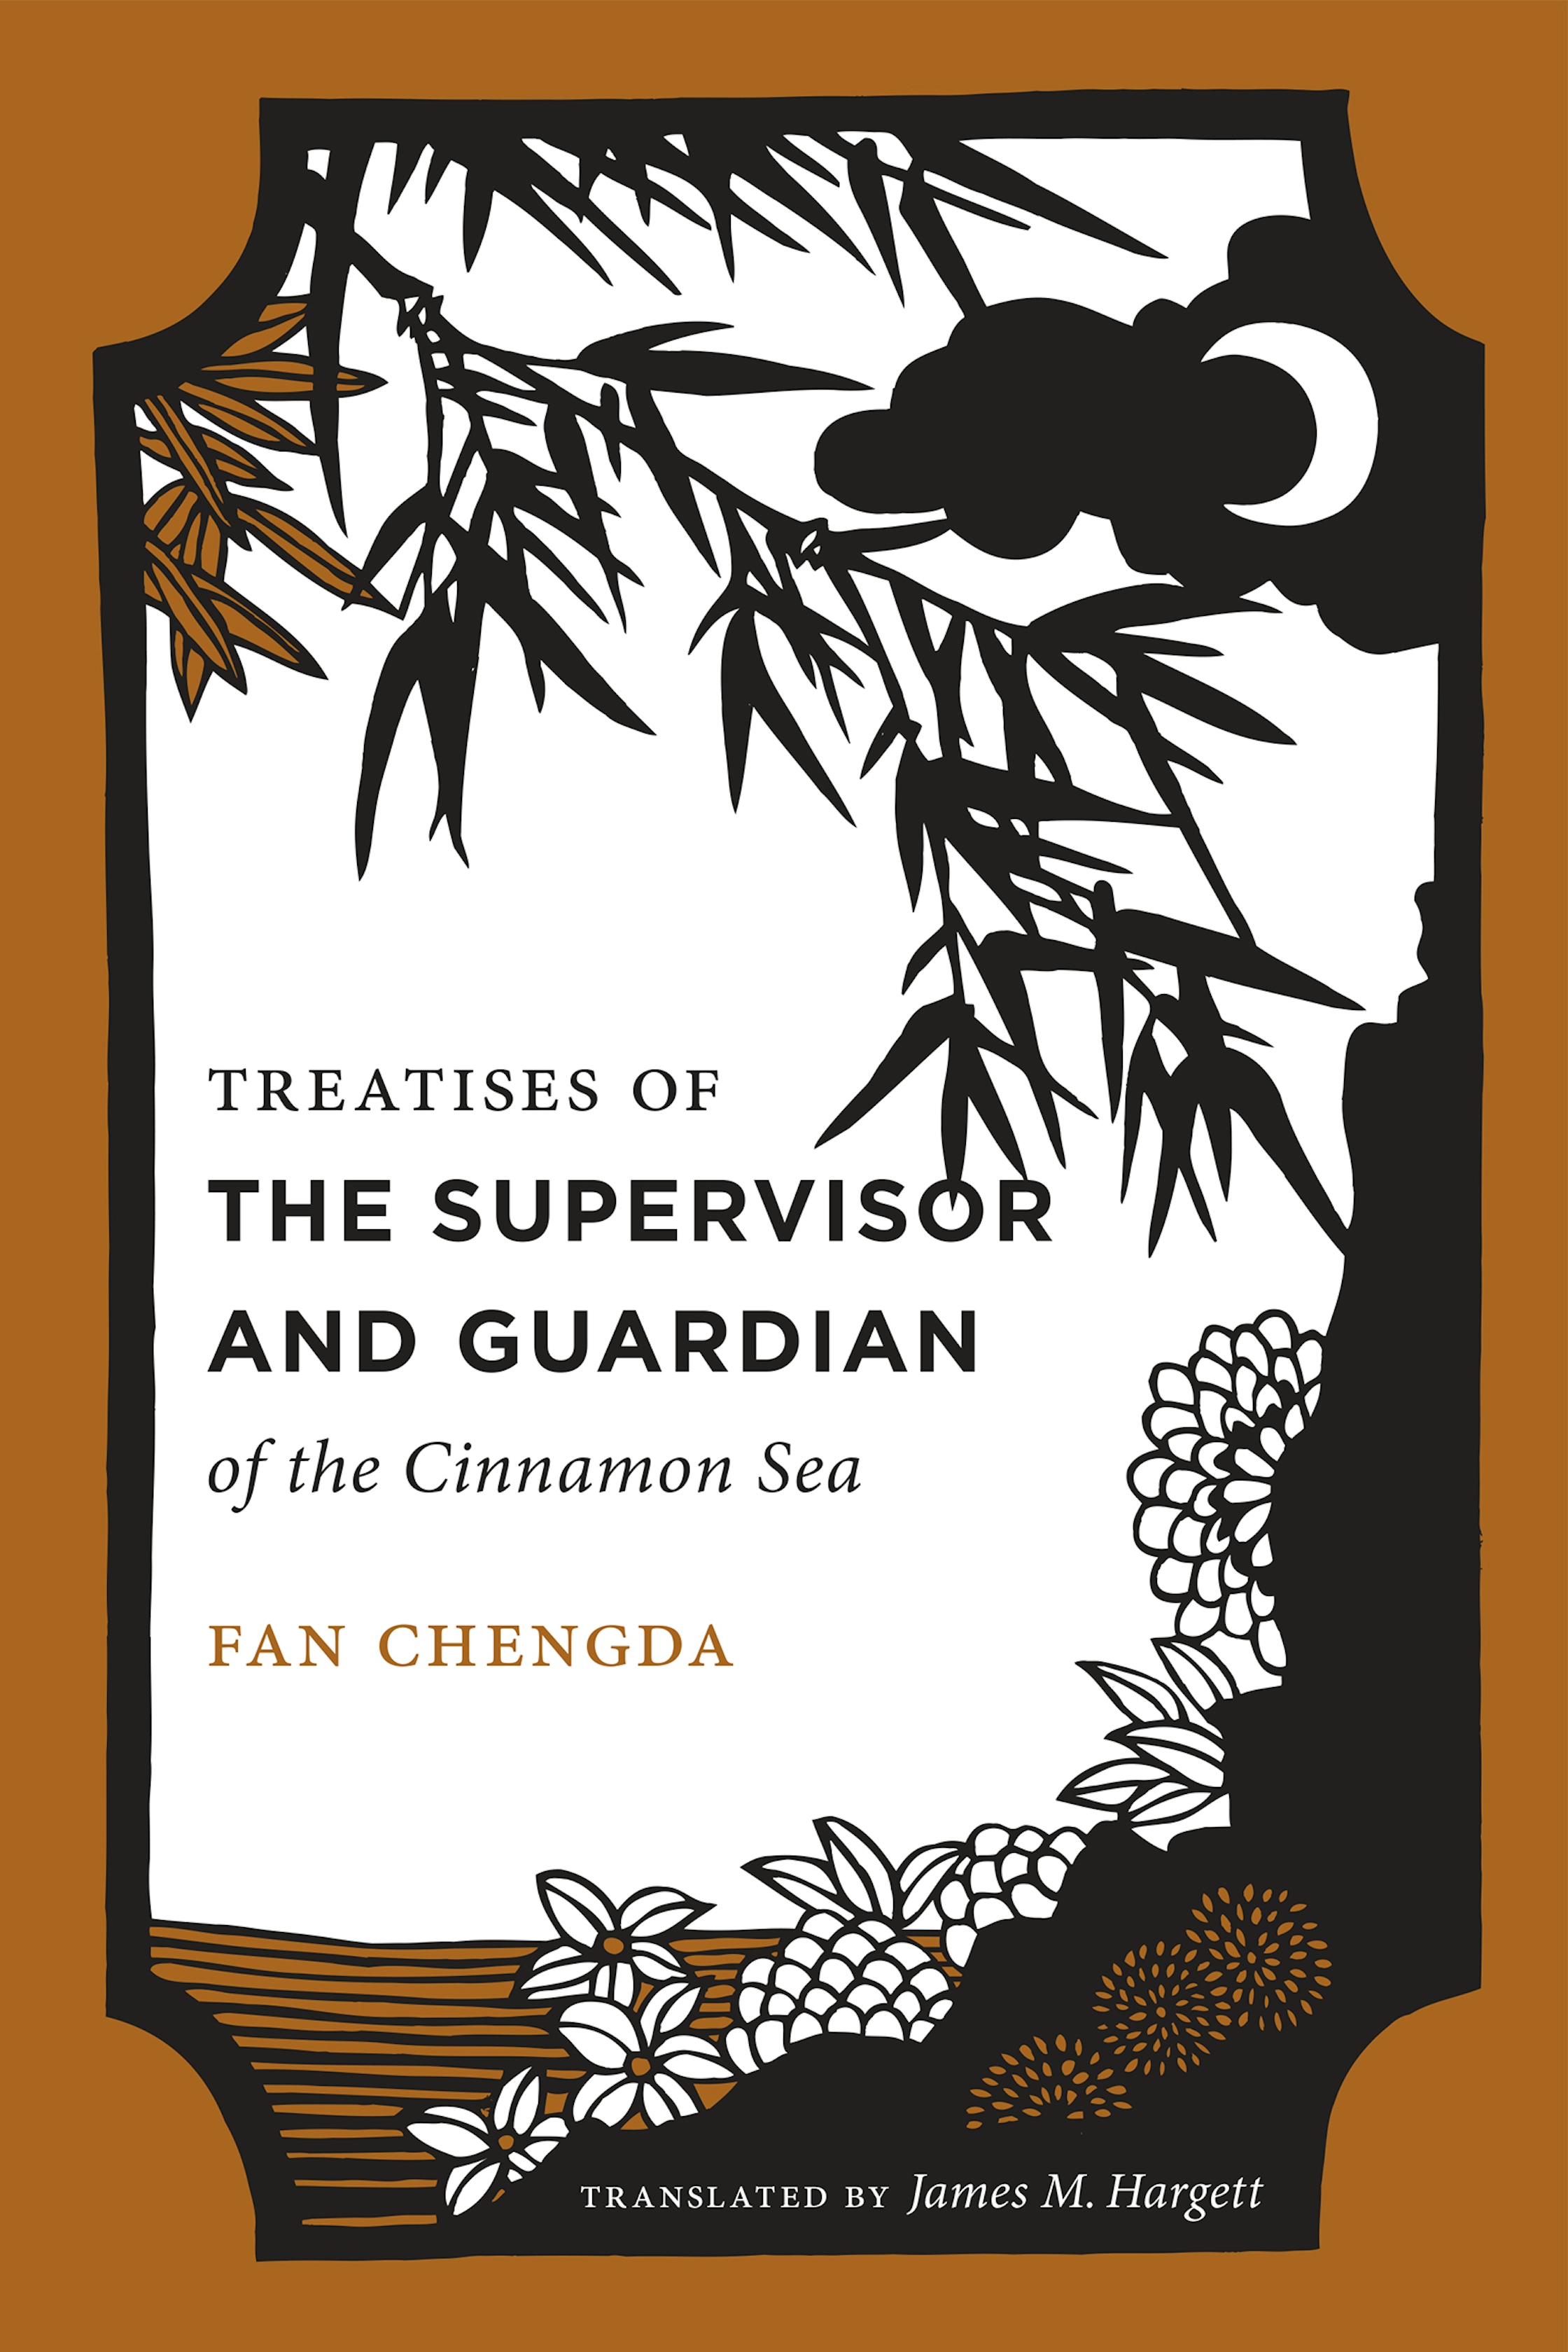 Treatises of the Supervisor and Guardian of the Cinnamon Sea